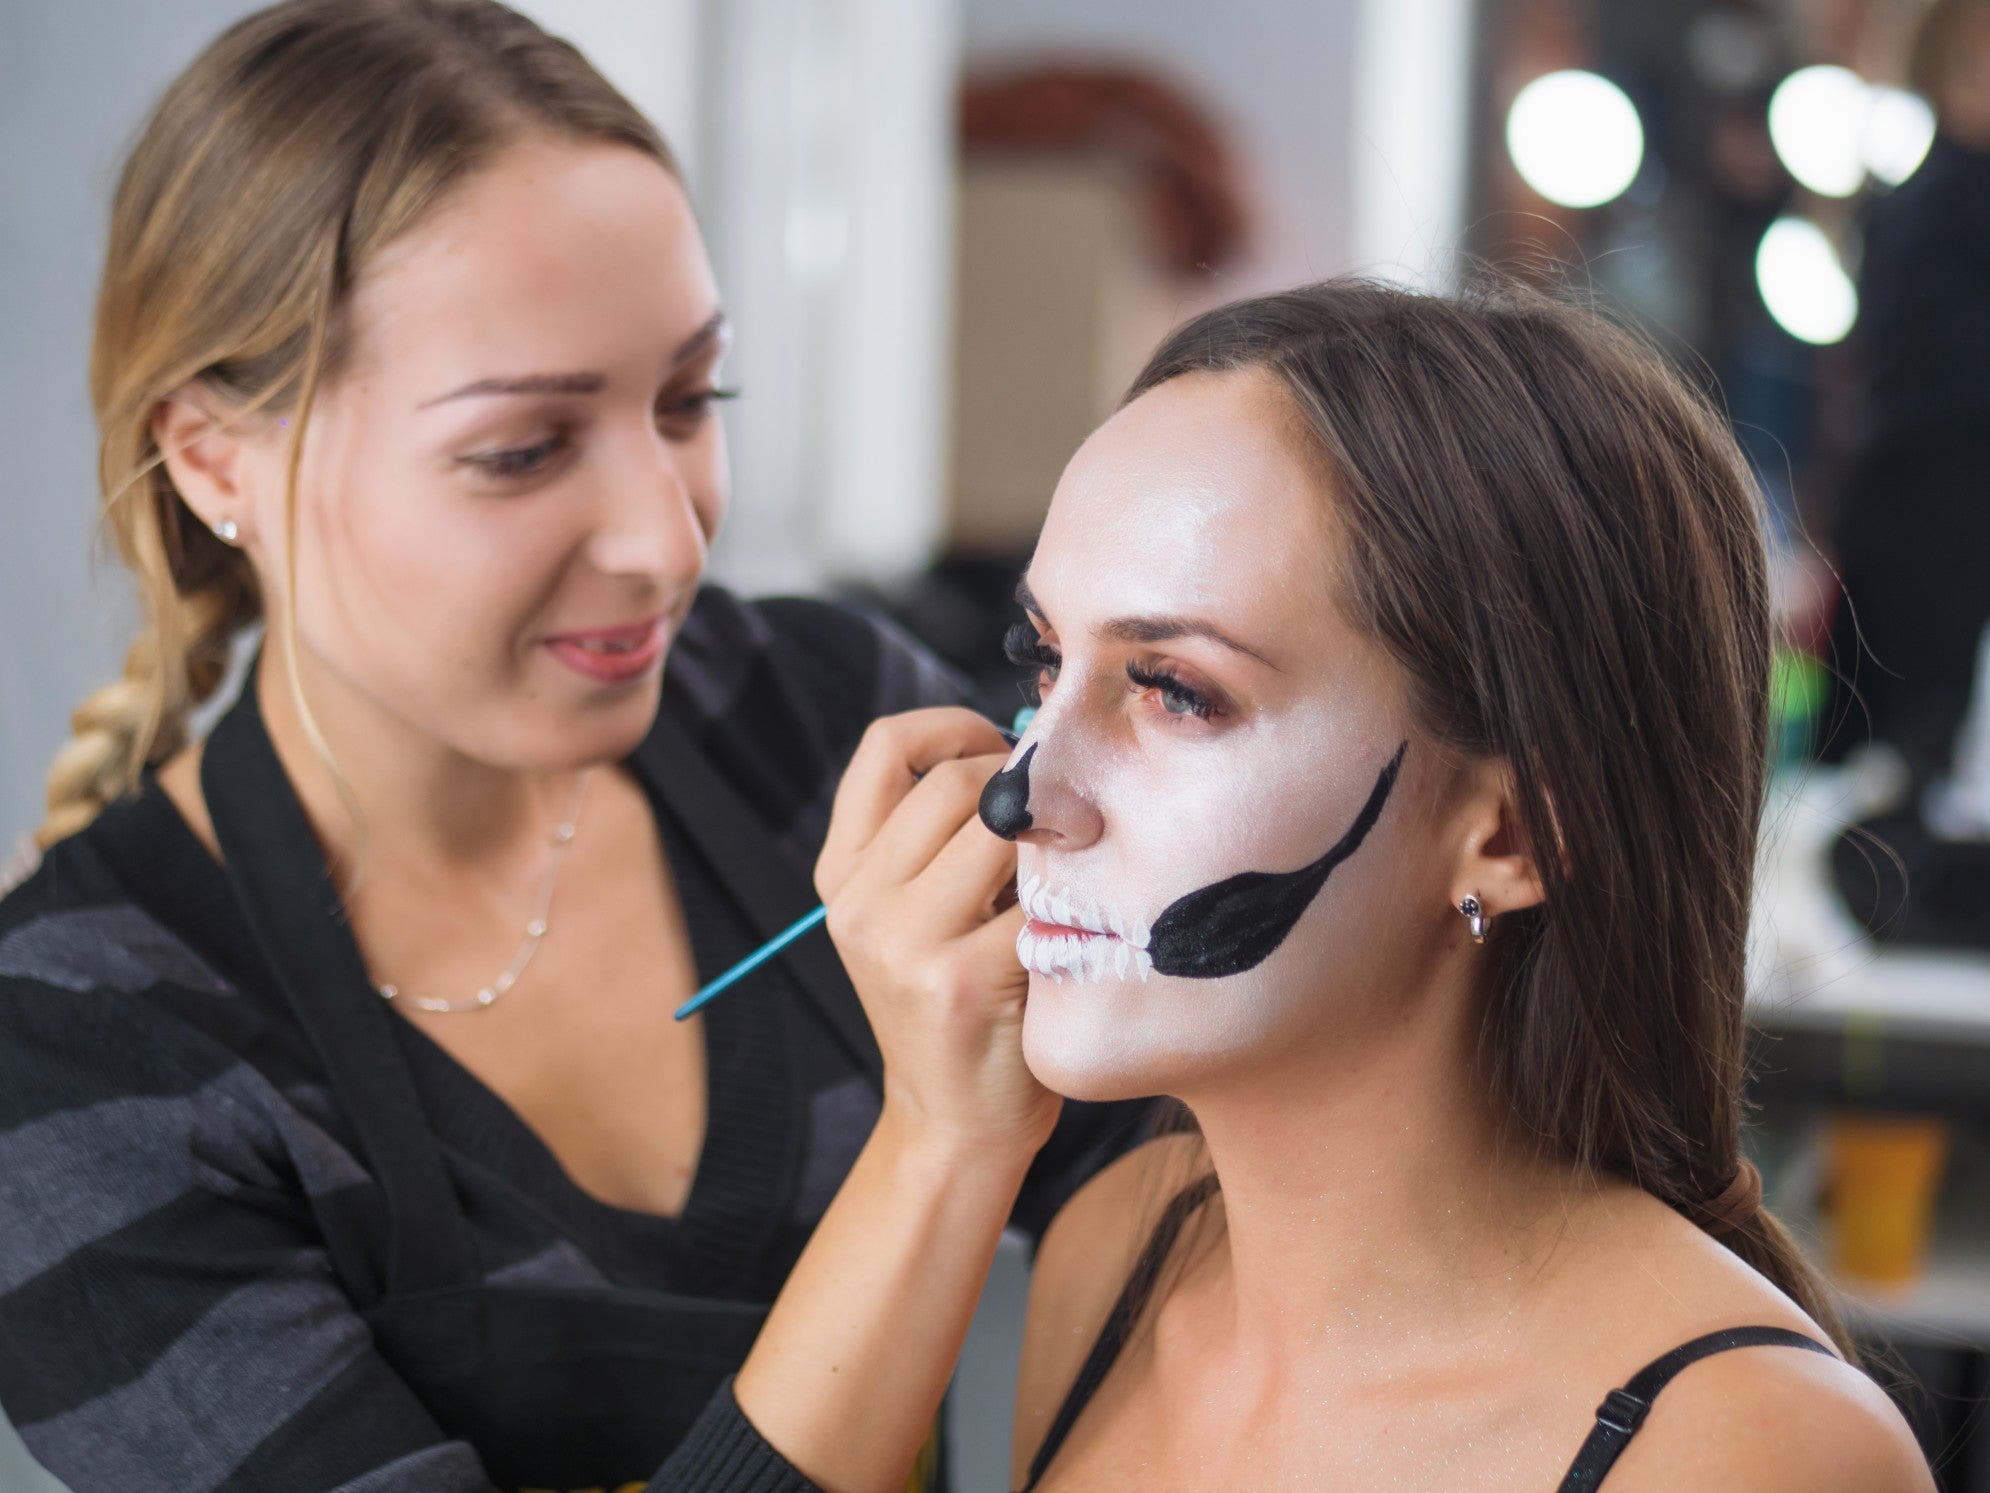 A woman putting white and black Halloween makeup on another woman